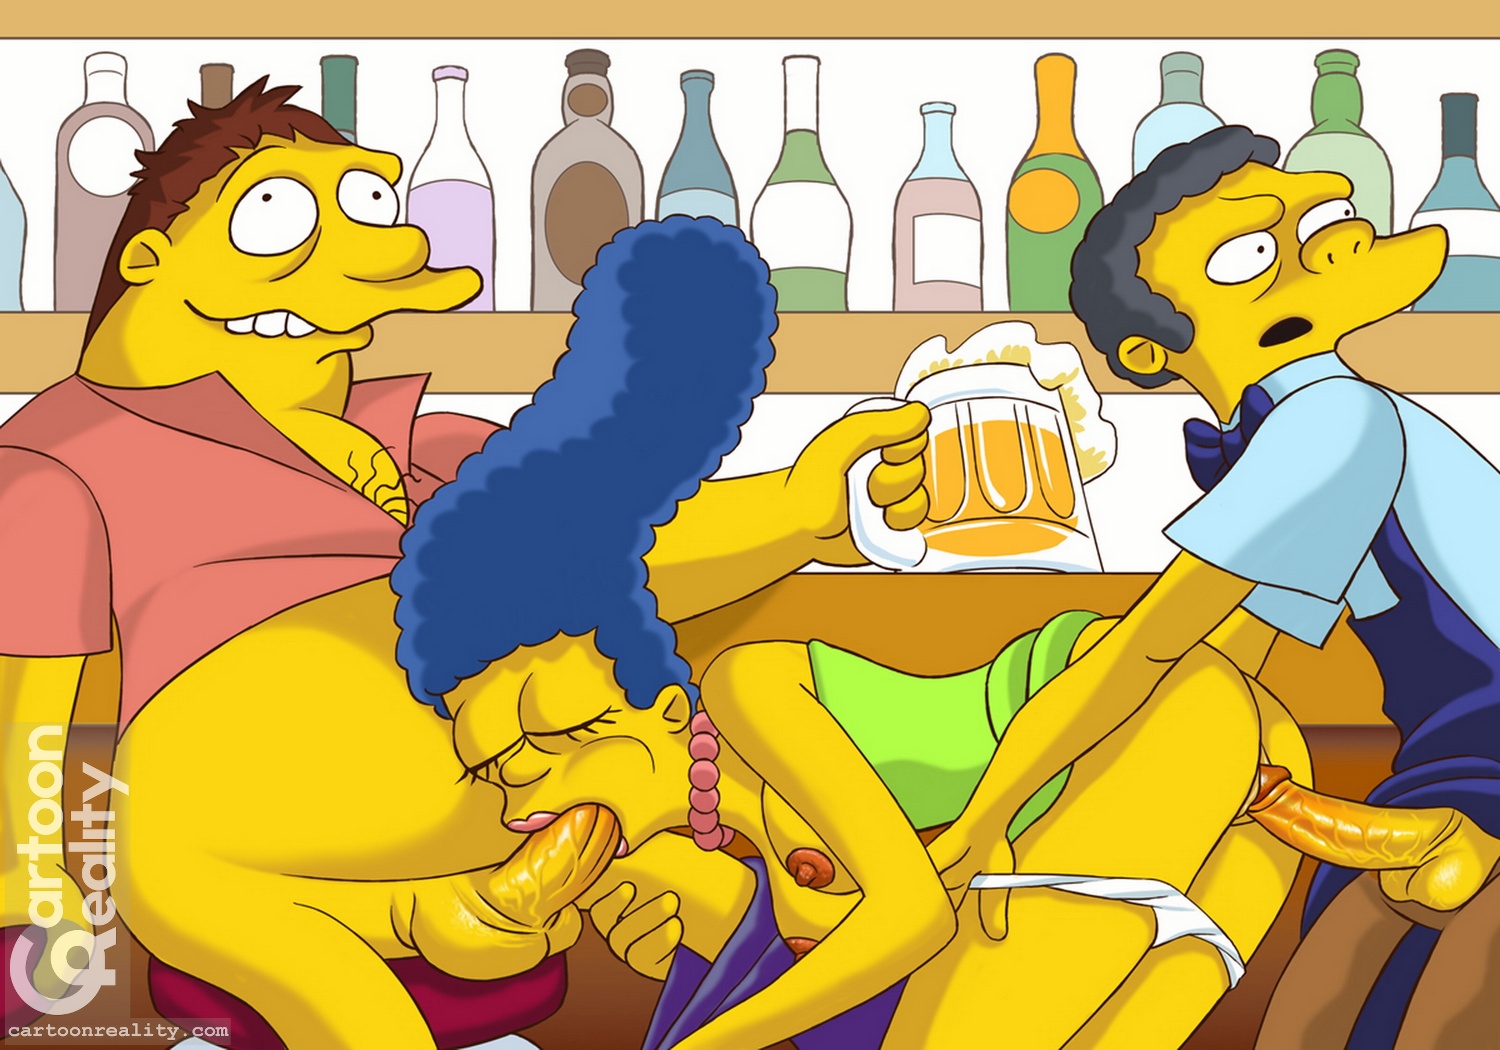 Simpsons threesome 3some group cartoon porn